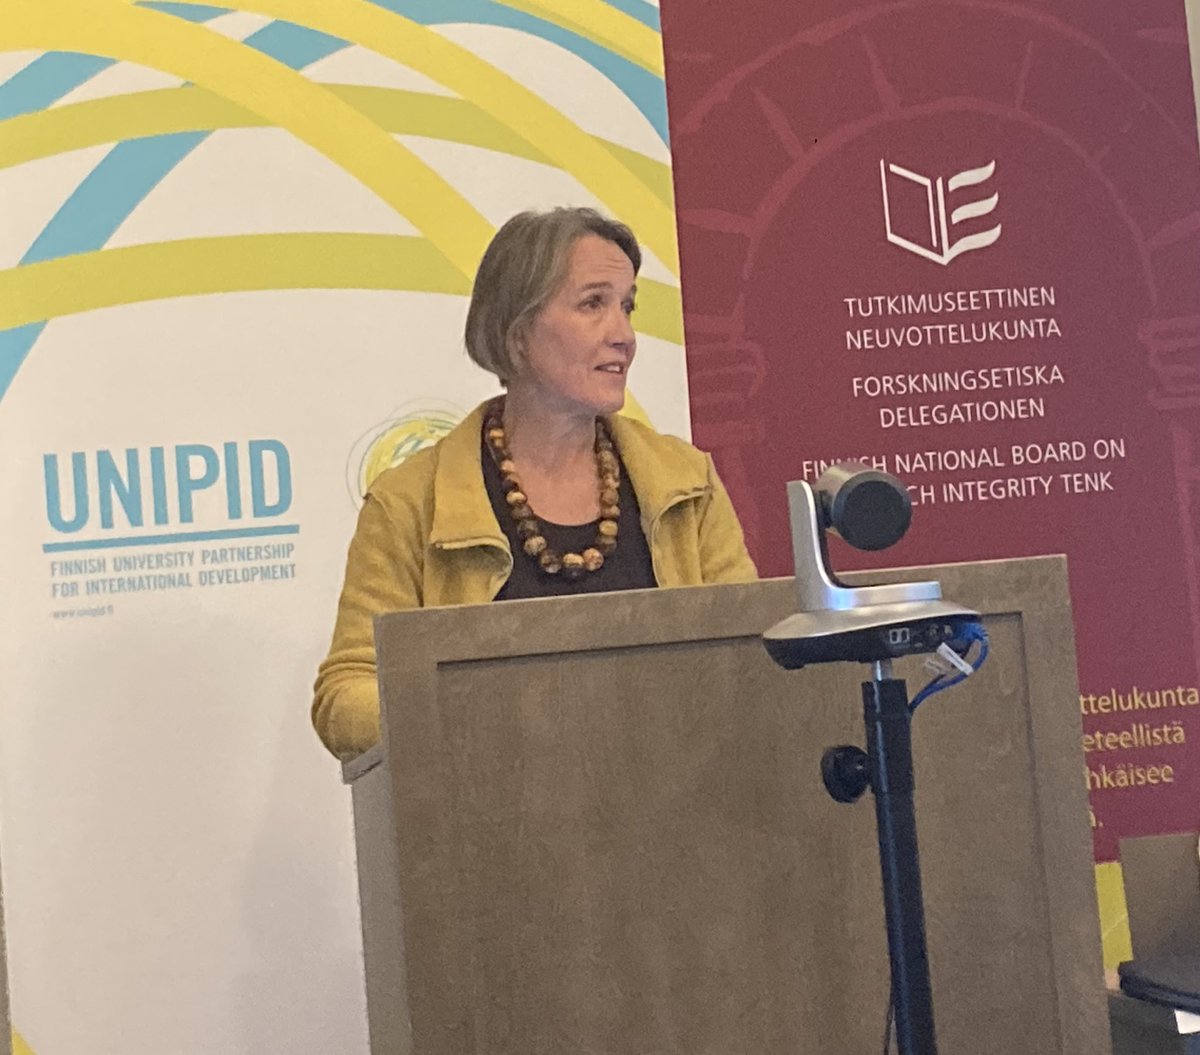 Chair of the Steering Group @LaaksoLiisa in her keynote @unipidfinland ethical guidelines launch event, calls attention to issues that we in the Global North can address more equitably, incl decolonising international rankings. #GlobalAcademicPartnerships